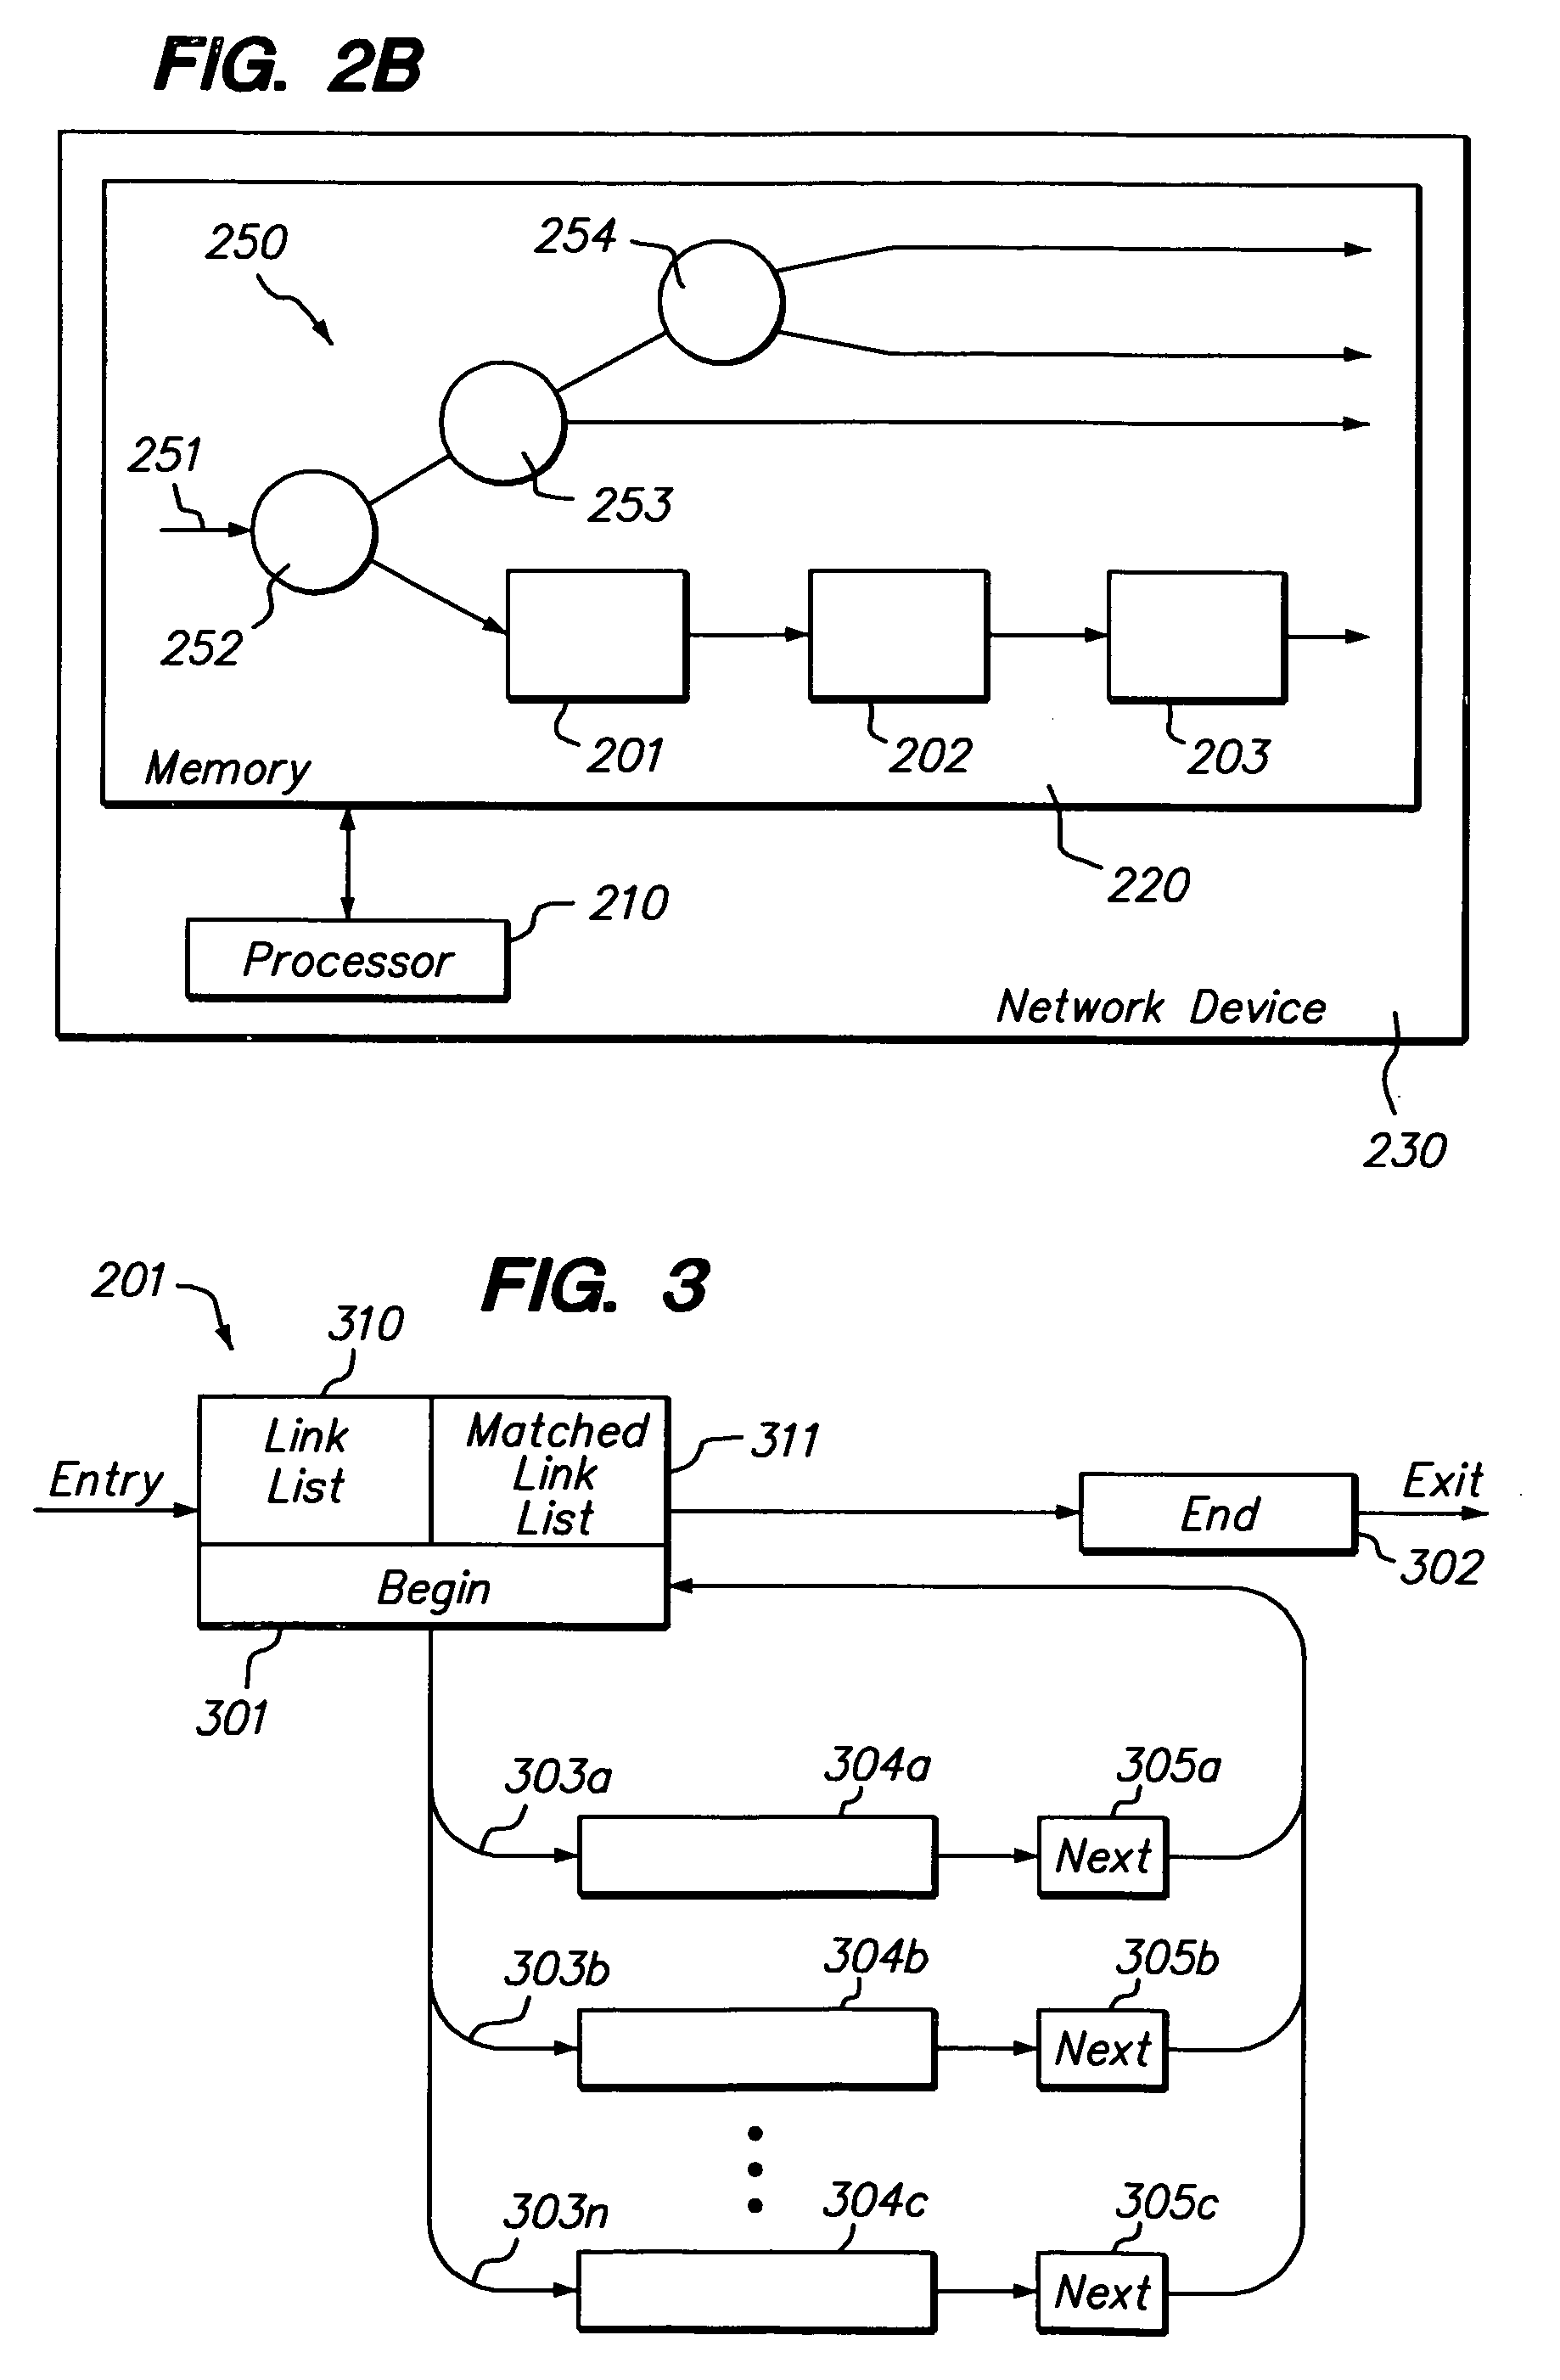 Method of parsing commands using linear tree representation